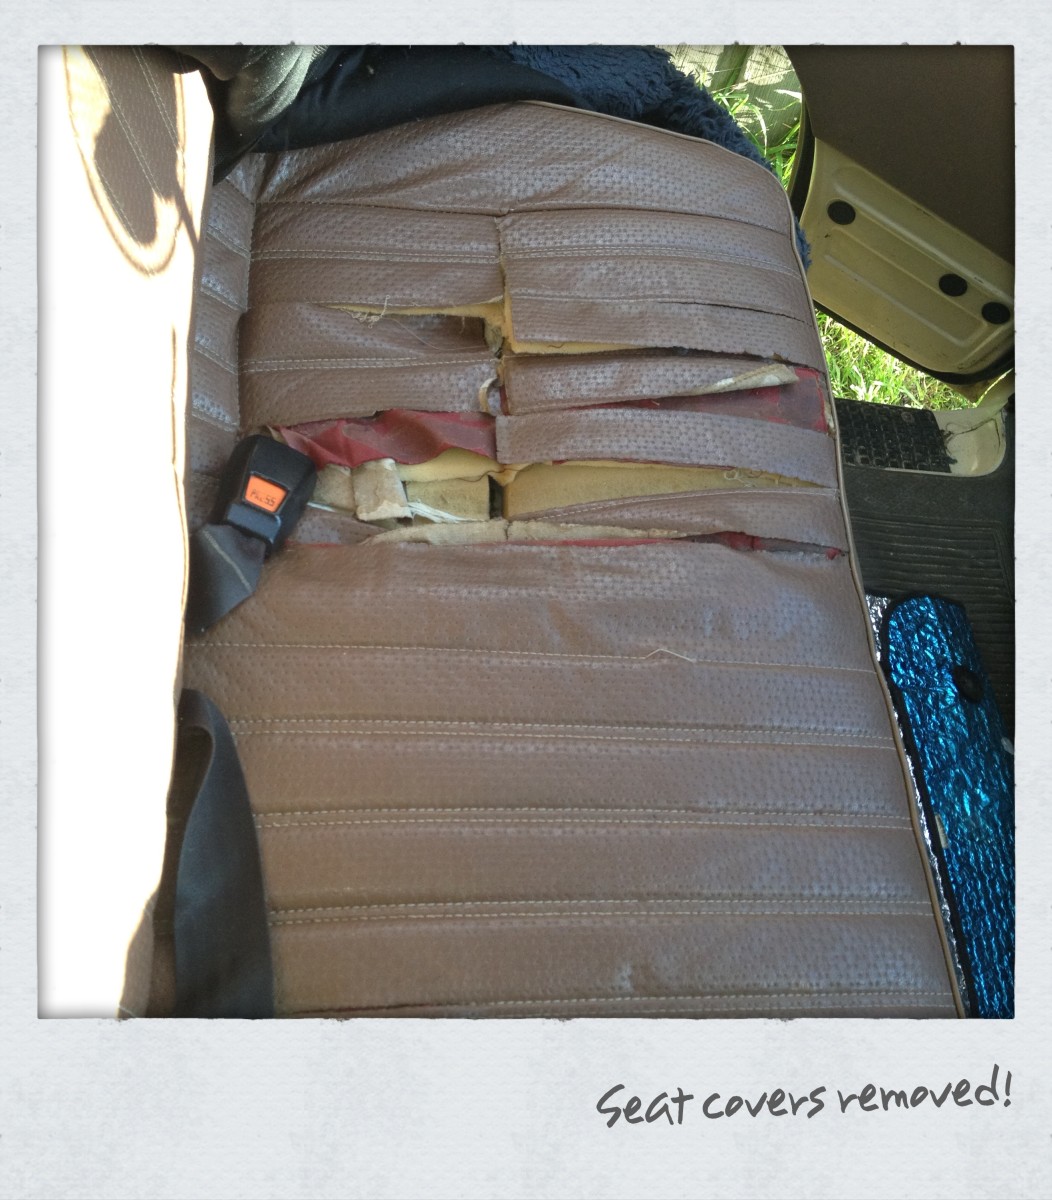 After repairing the tears car seat covers were sewn to save $$